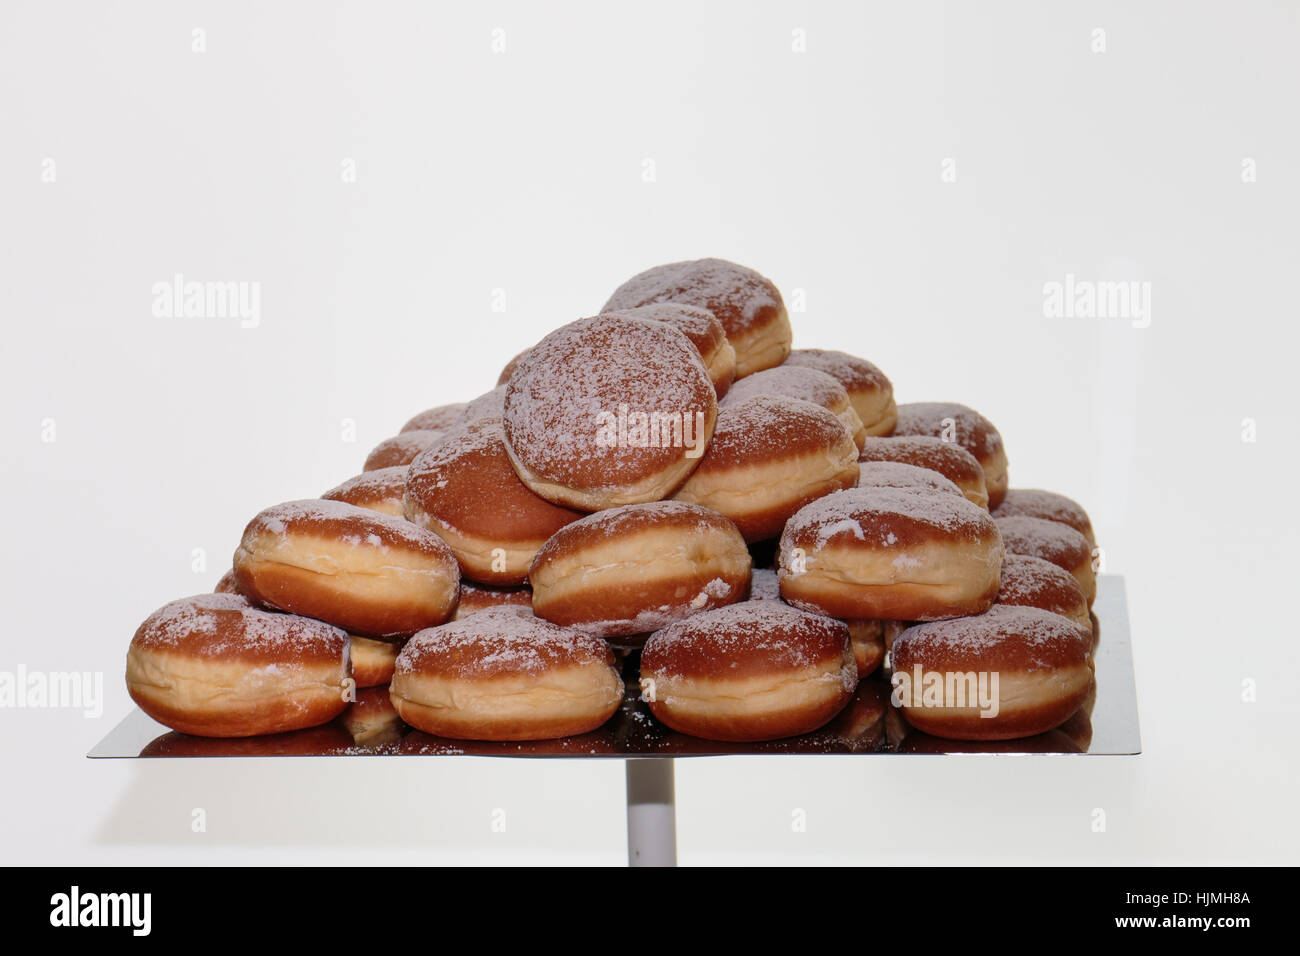 Heap of Fried Bavarian Cream Filled Donuts on Tray Stock Photo